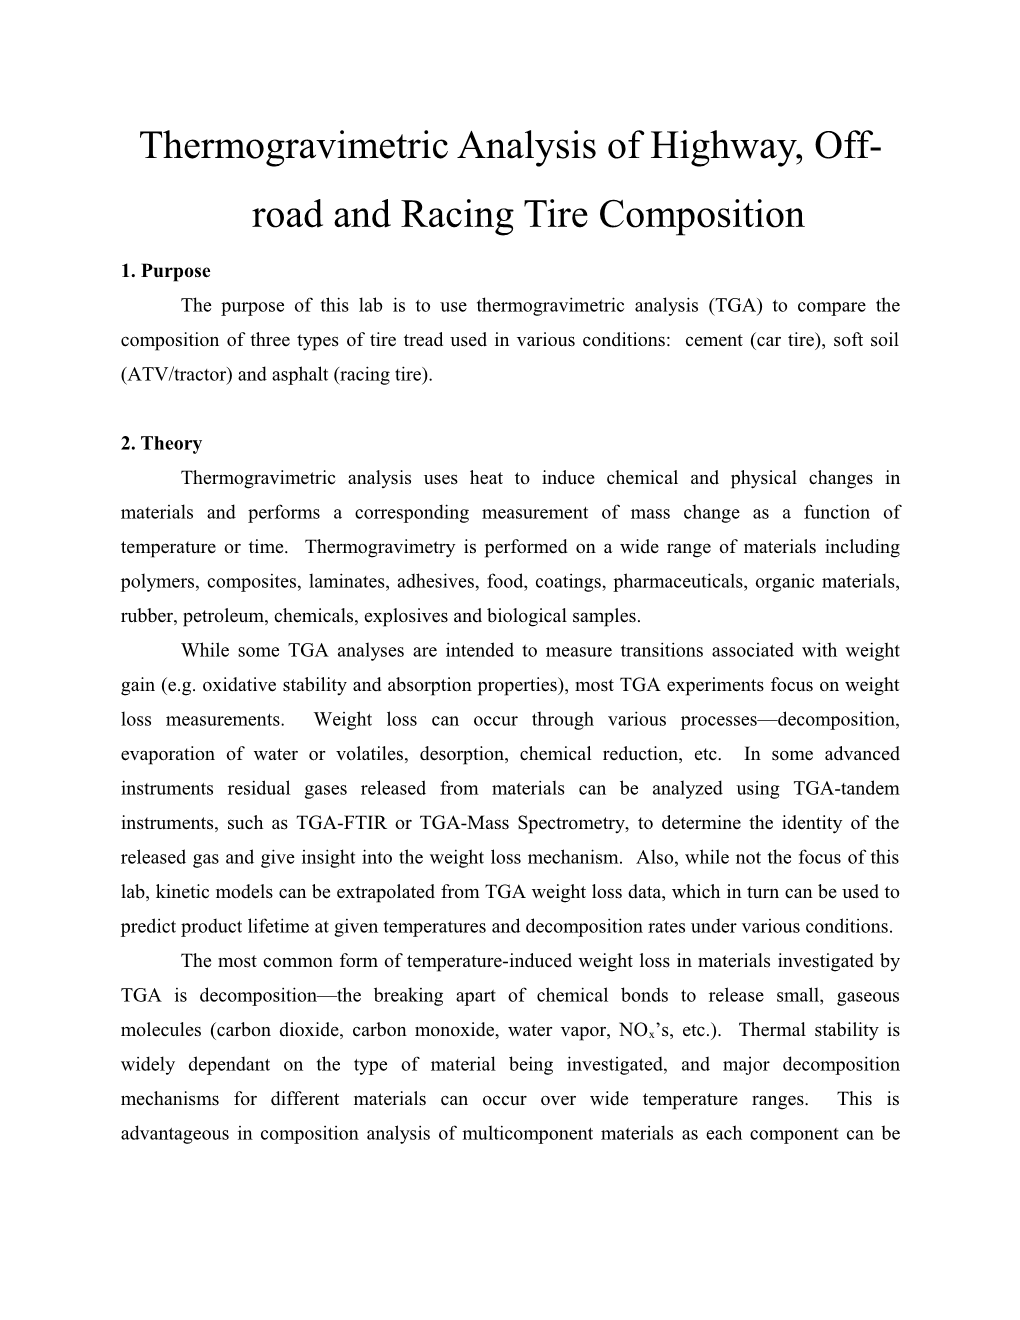 Thermogravimetric Analysis of Highway, Off-Road and Racing Tire Composition